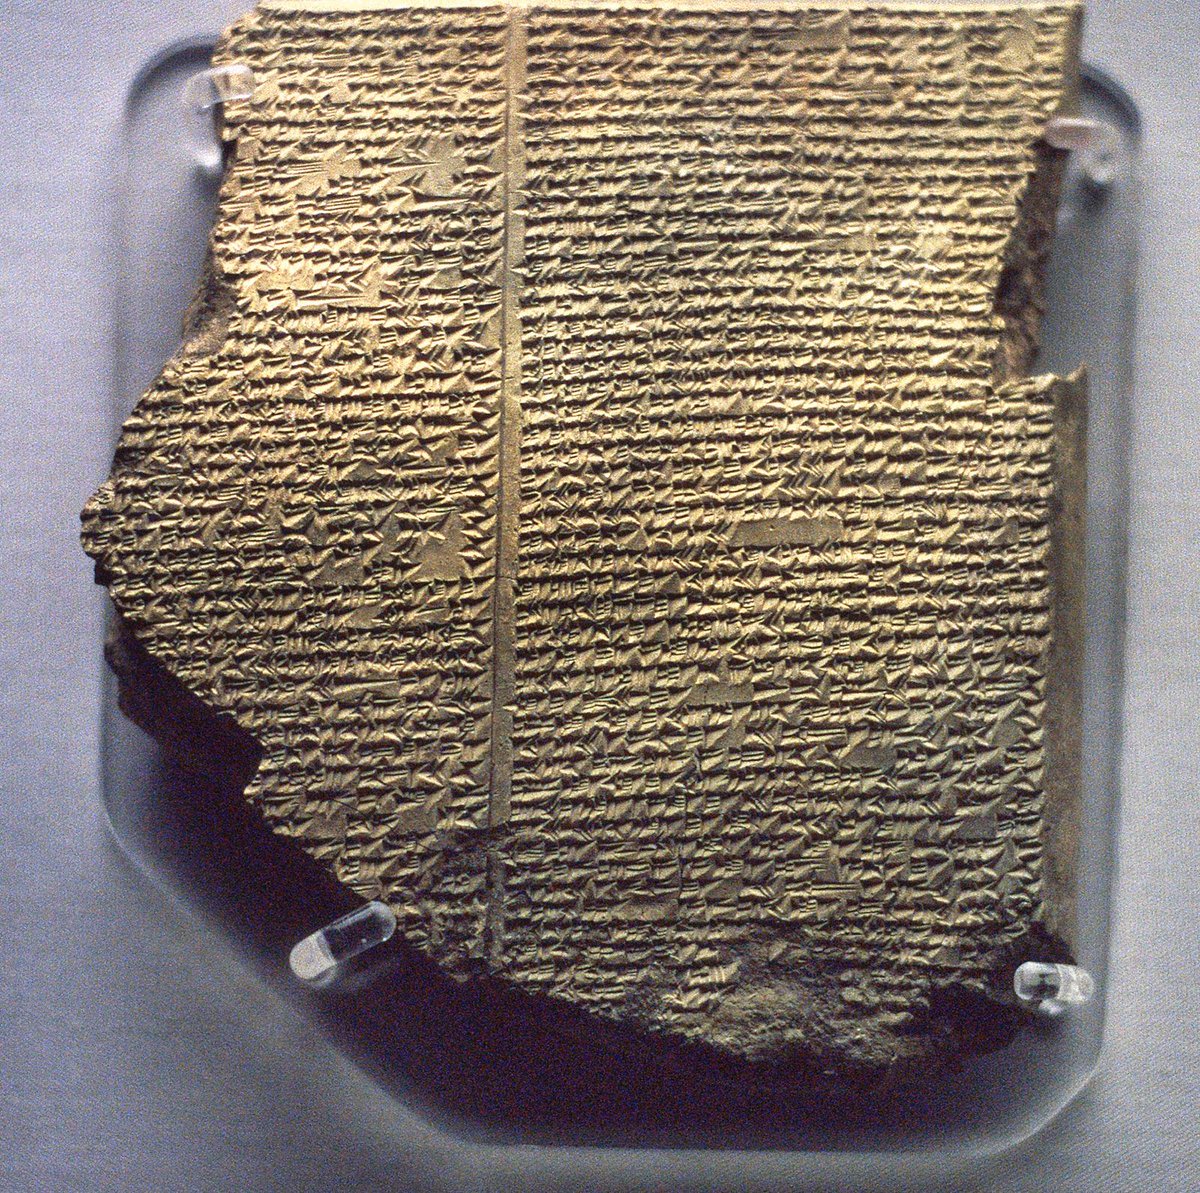 ⭕️ Take a look at the electronic version of the Gilgamesh epic in all its versions and forms, published by the Ludwig Maximilian University of Munich, at the “electronic Babylonian Library” (eBL) Project. ℹ️ ebl.lmu.de/corpus/L/1/4